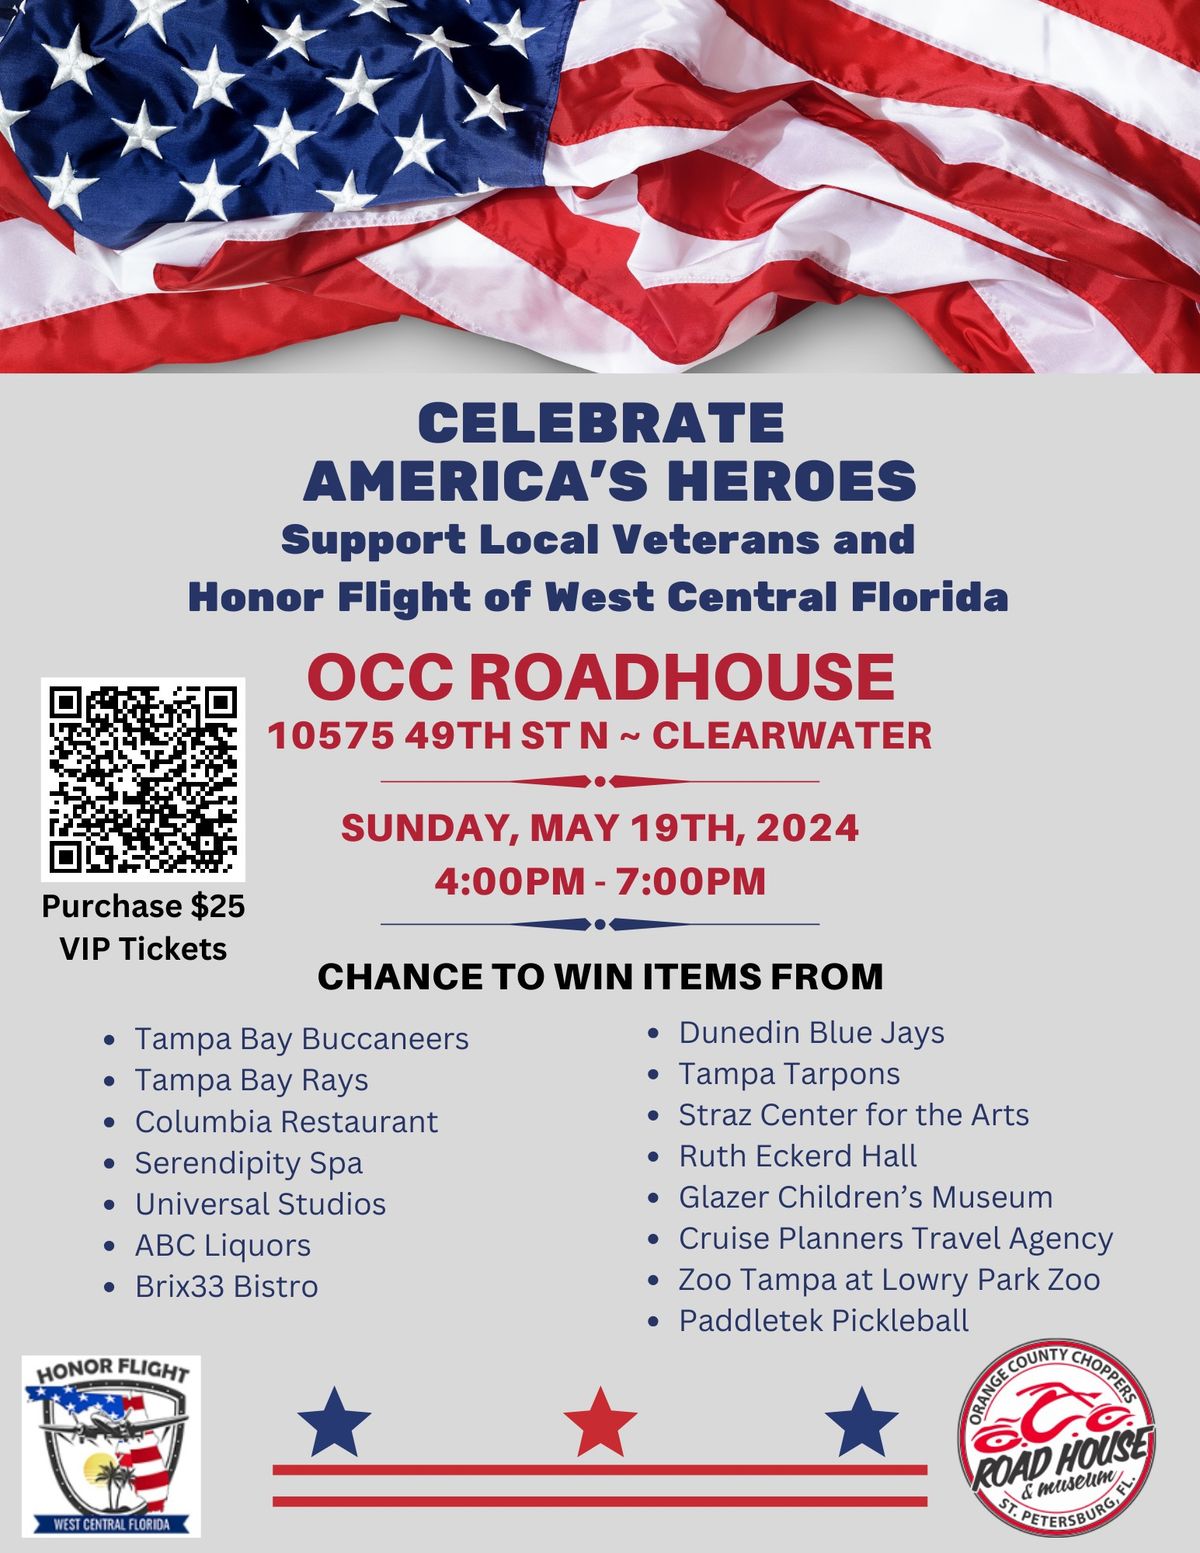 Celebrate America's Heroes - Support Local Veterans and Honor Flight of West Central Florida